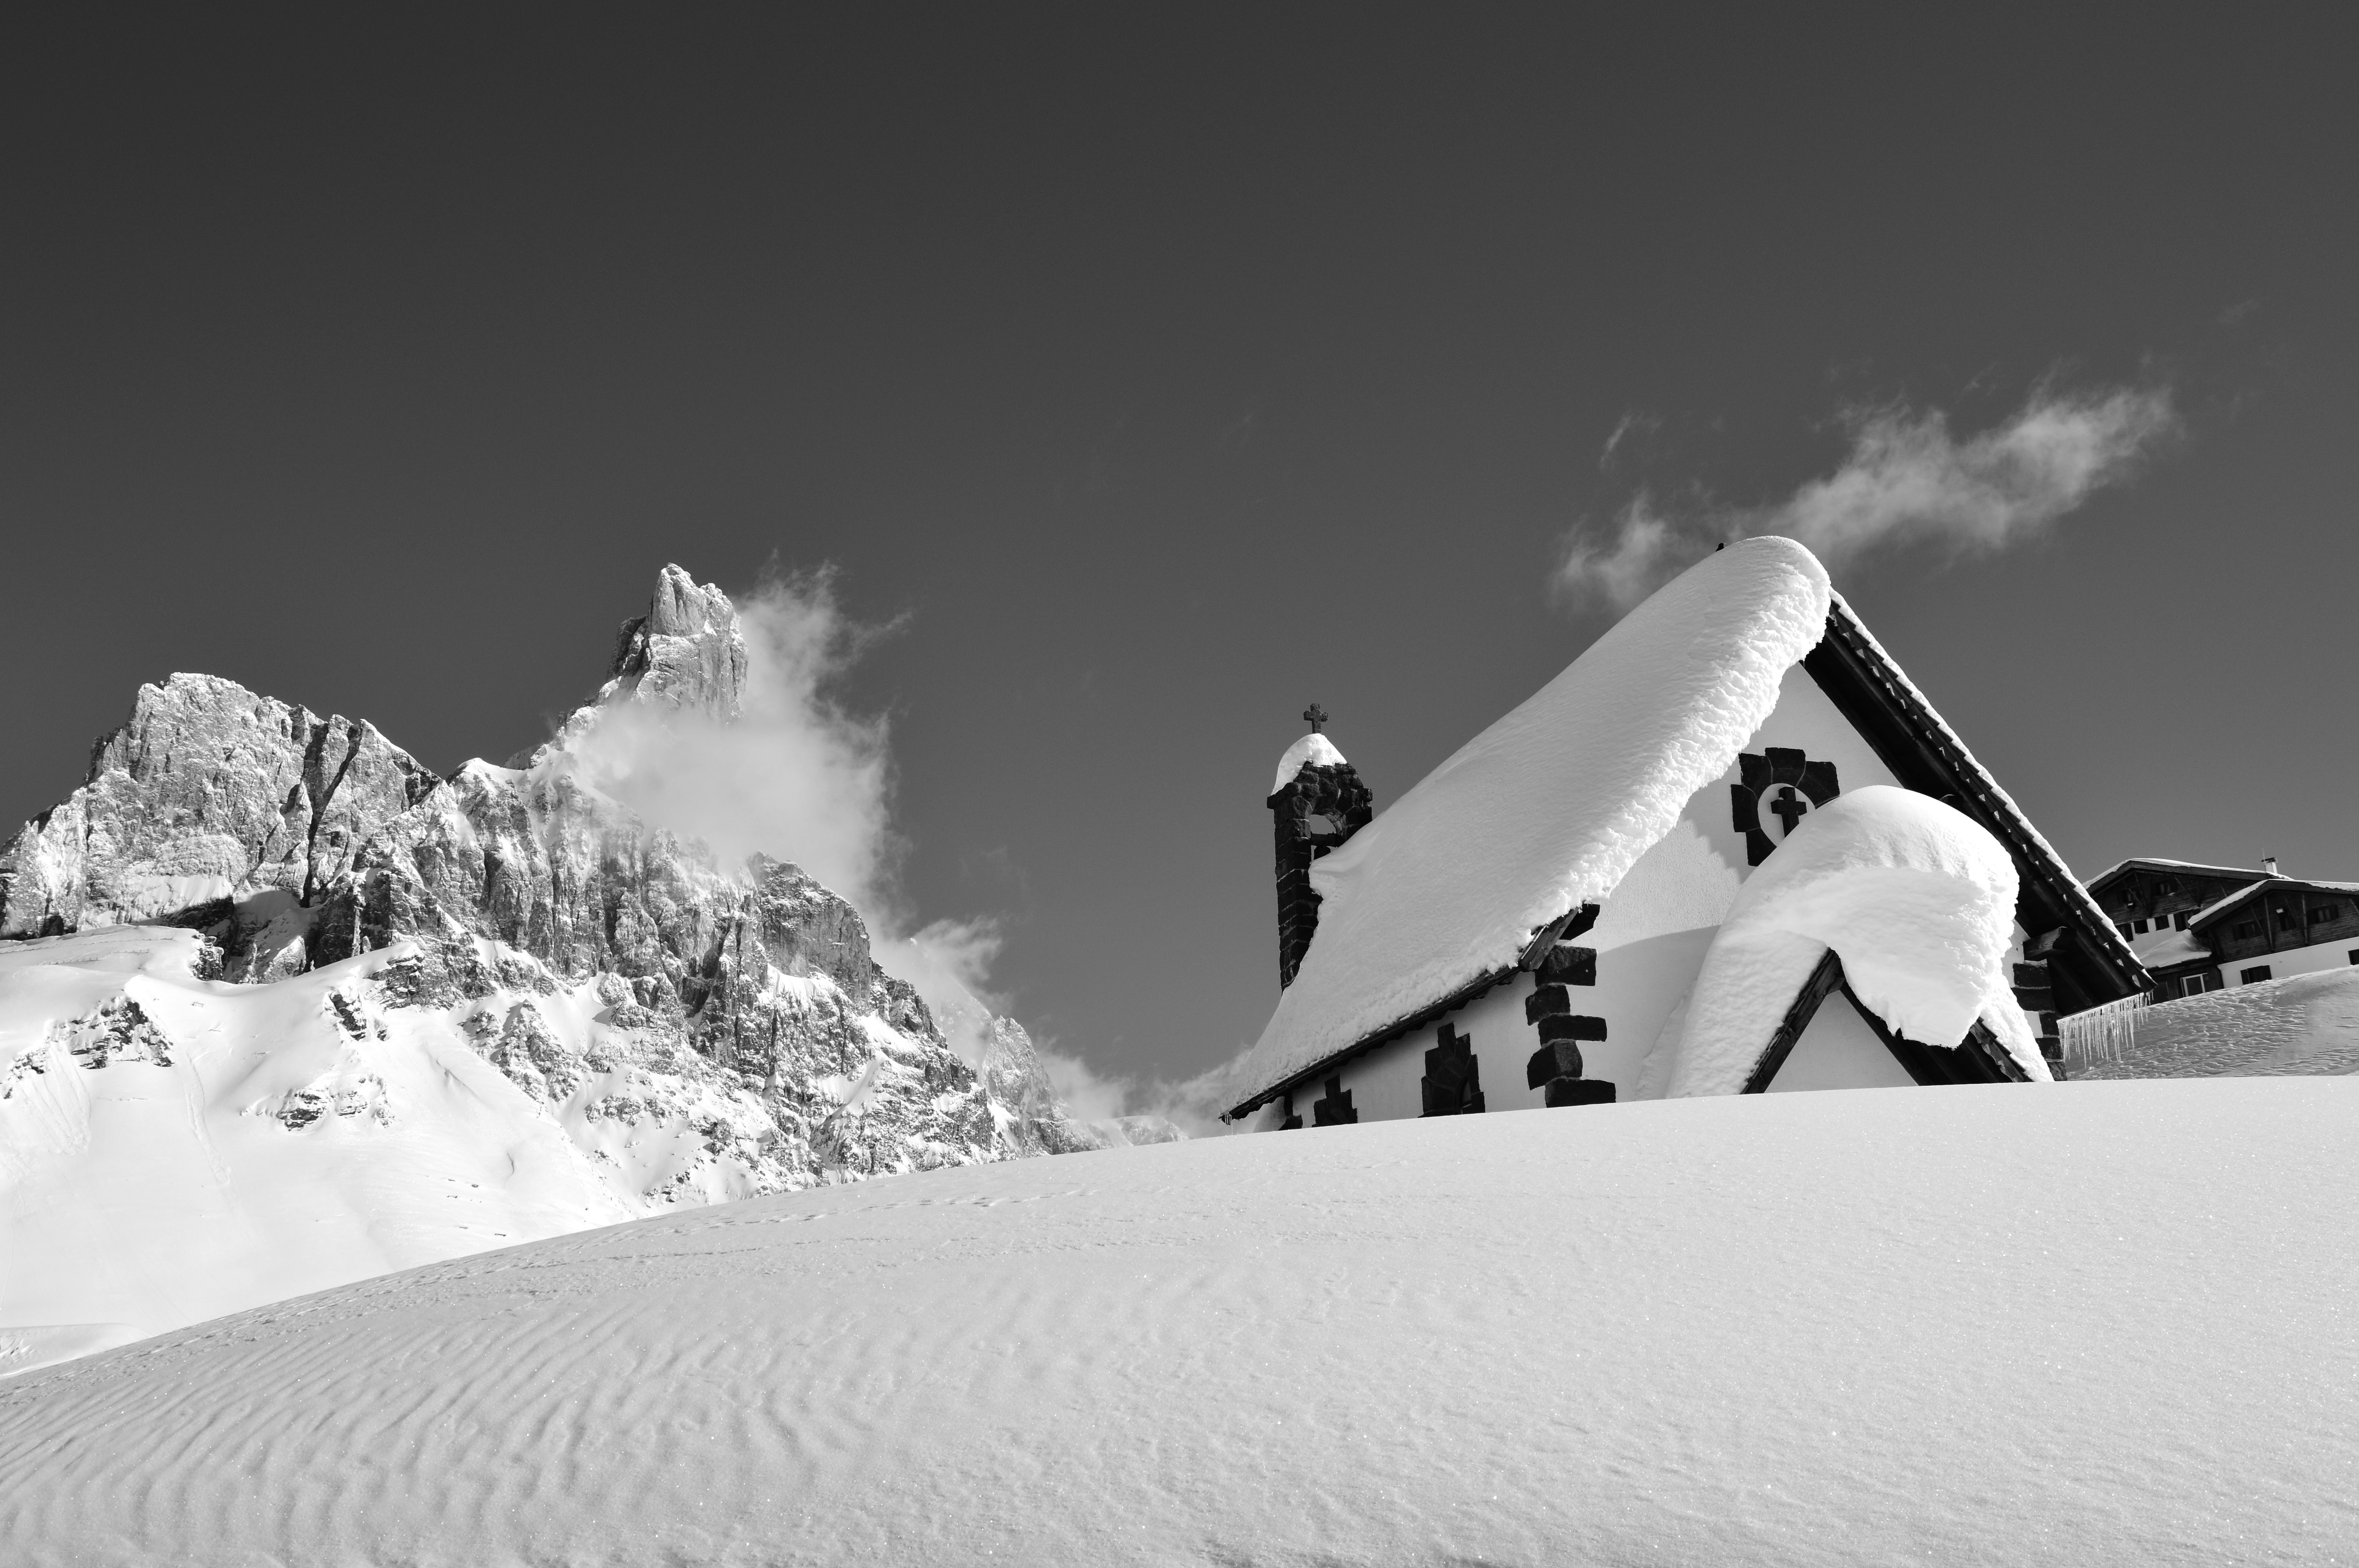 General 6016x4000 mountains snow monochrome Dolomites nature winter house Alps cold ice building